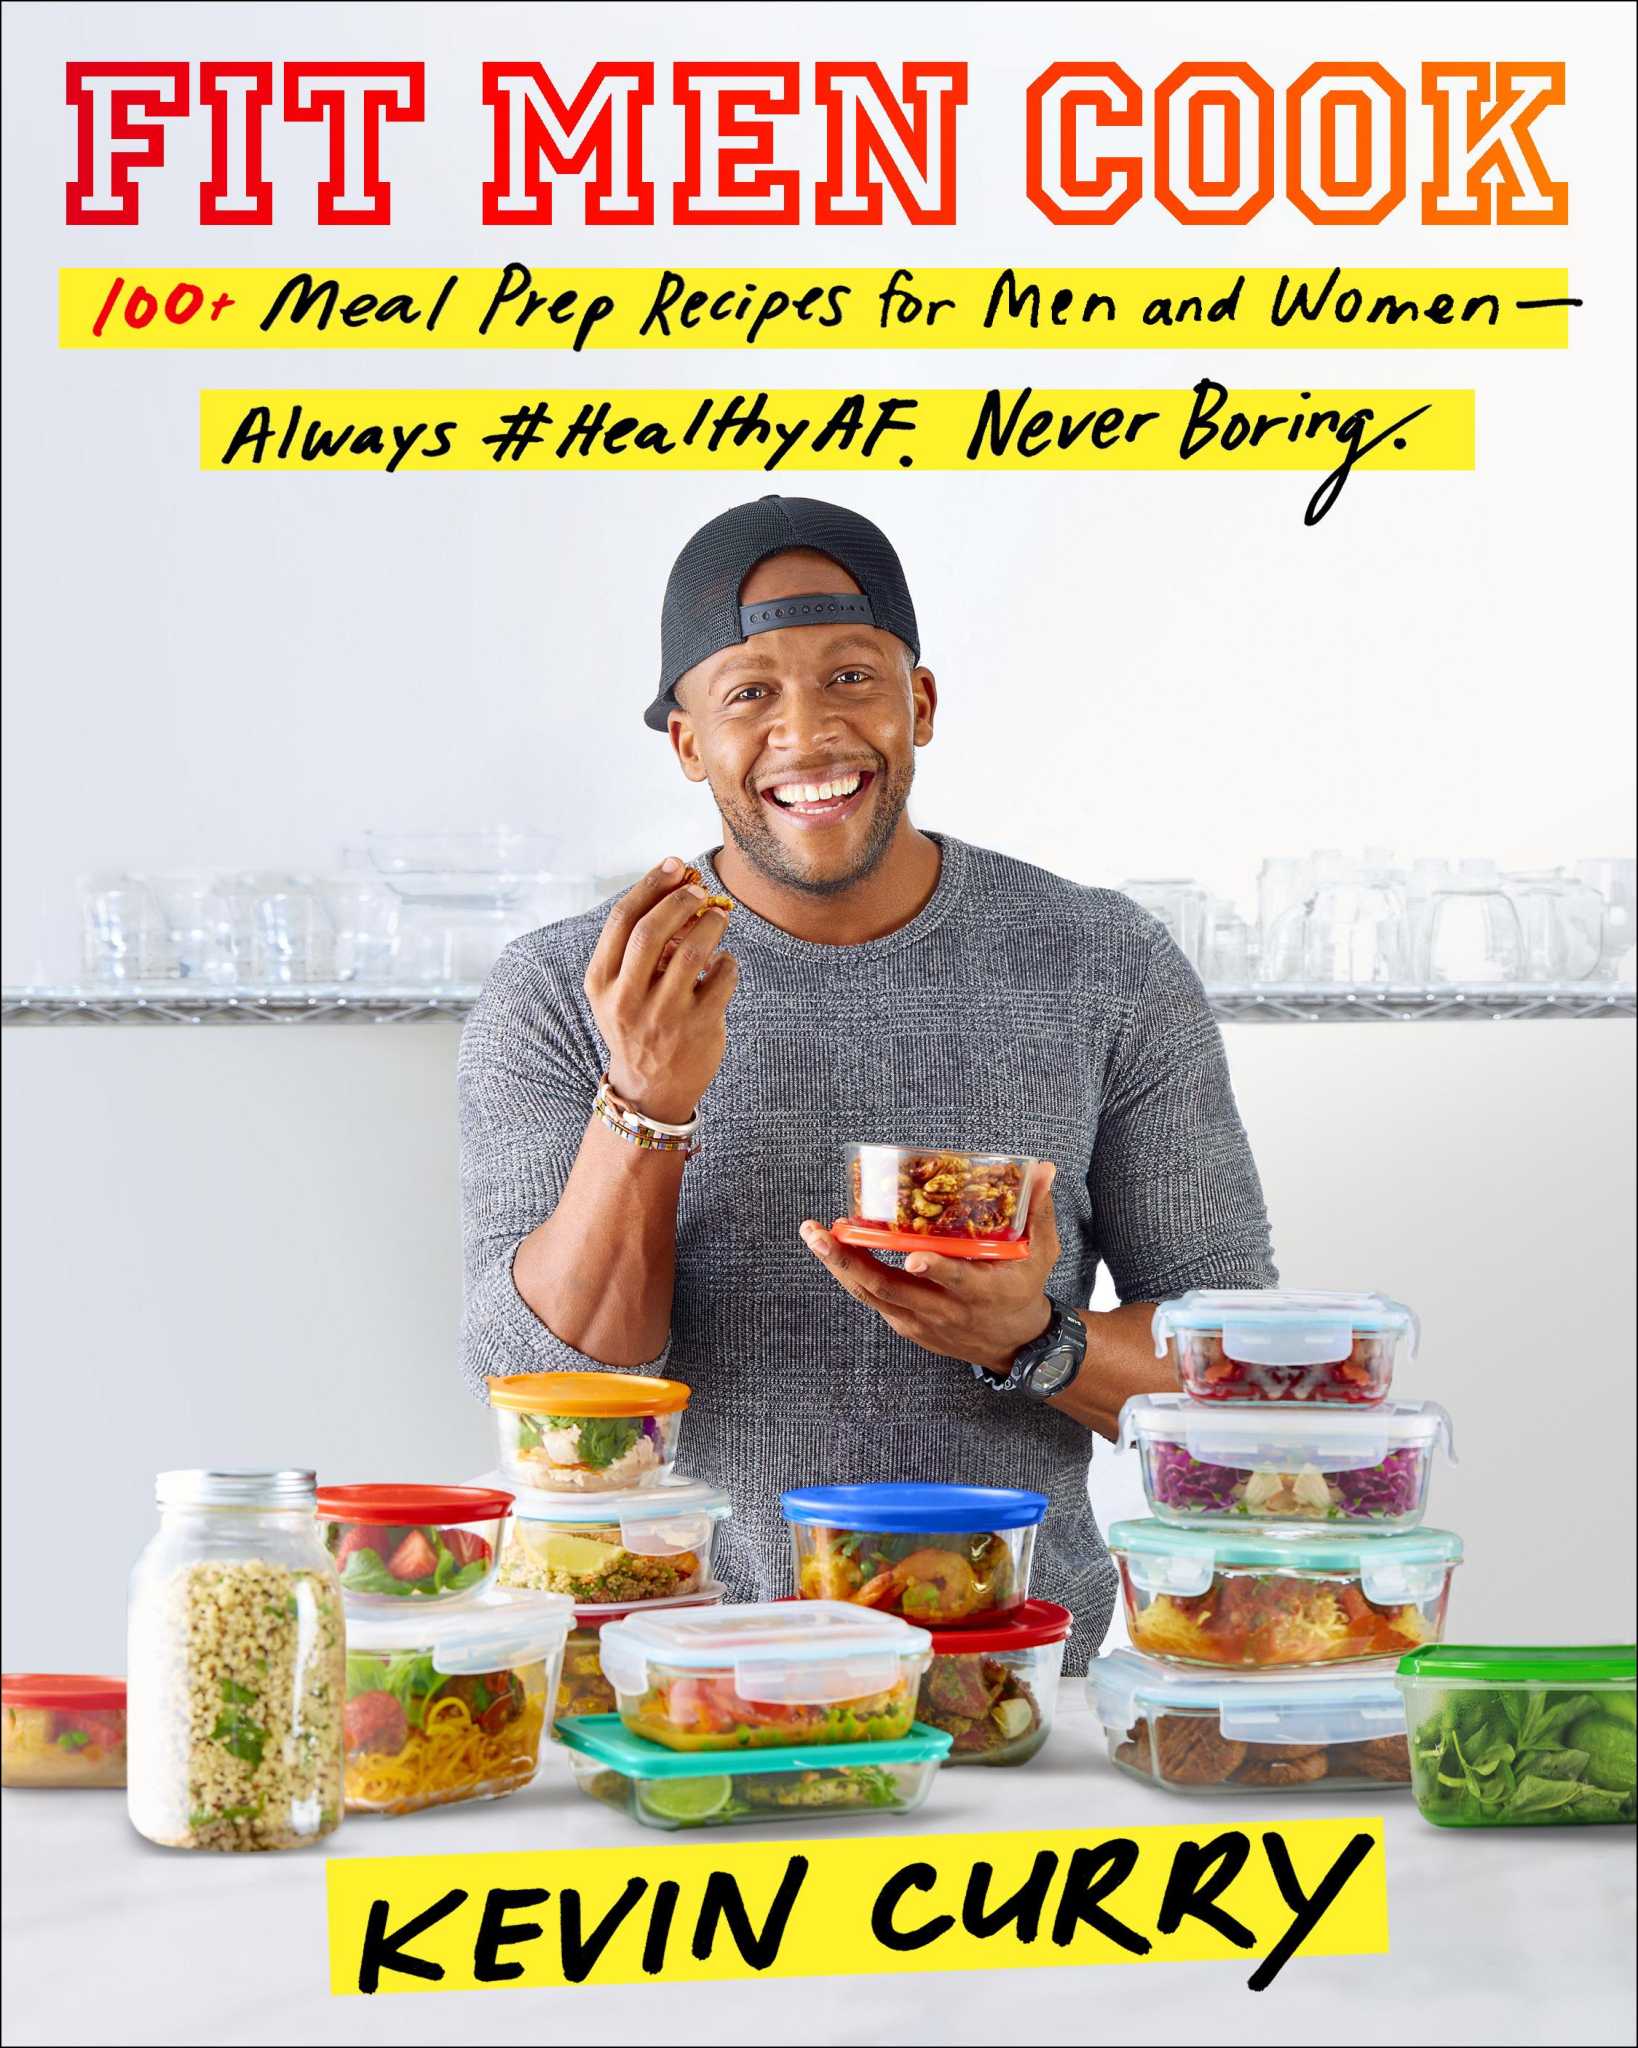 Fit Men Cook' author and Instagram star Kevin Curry heading to Houston